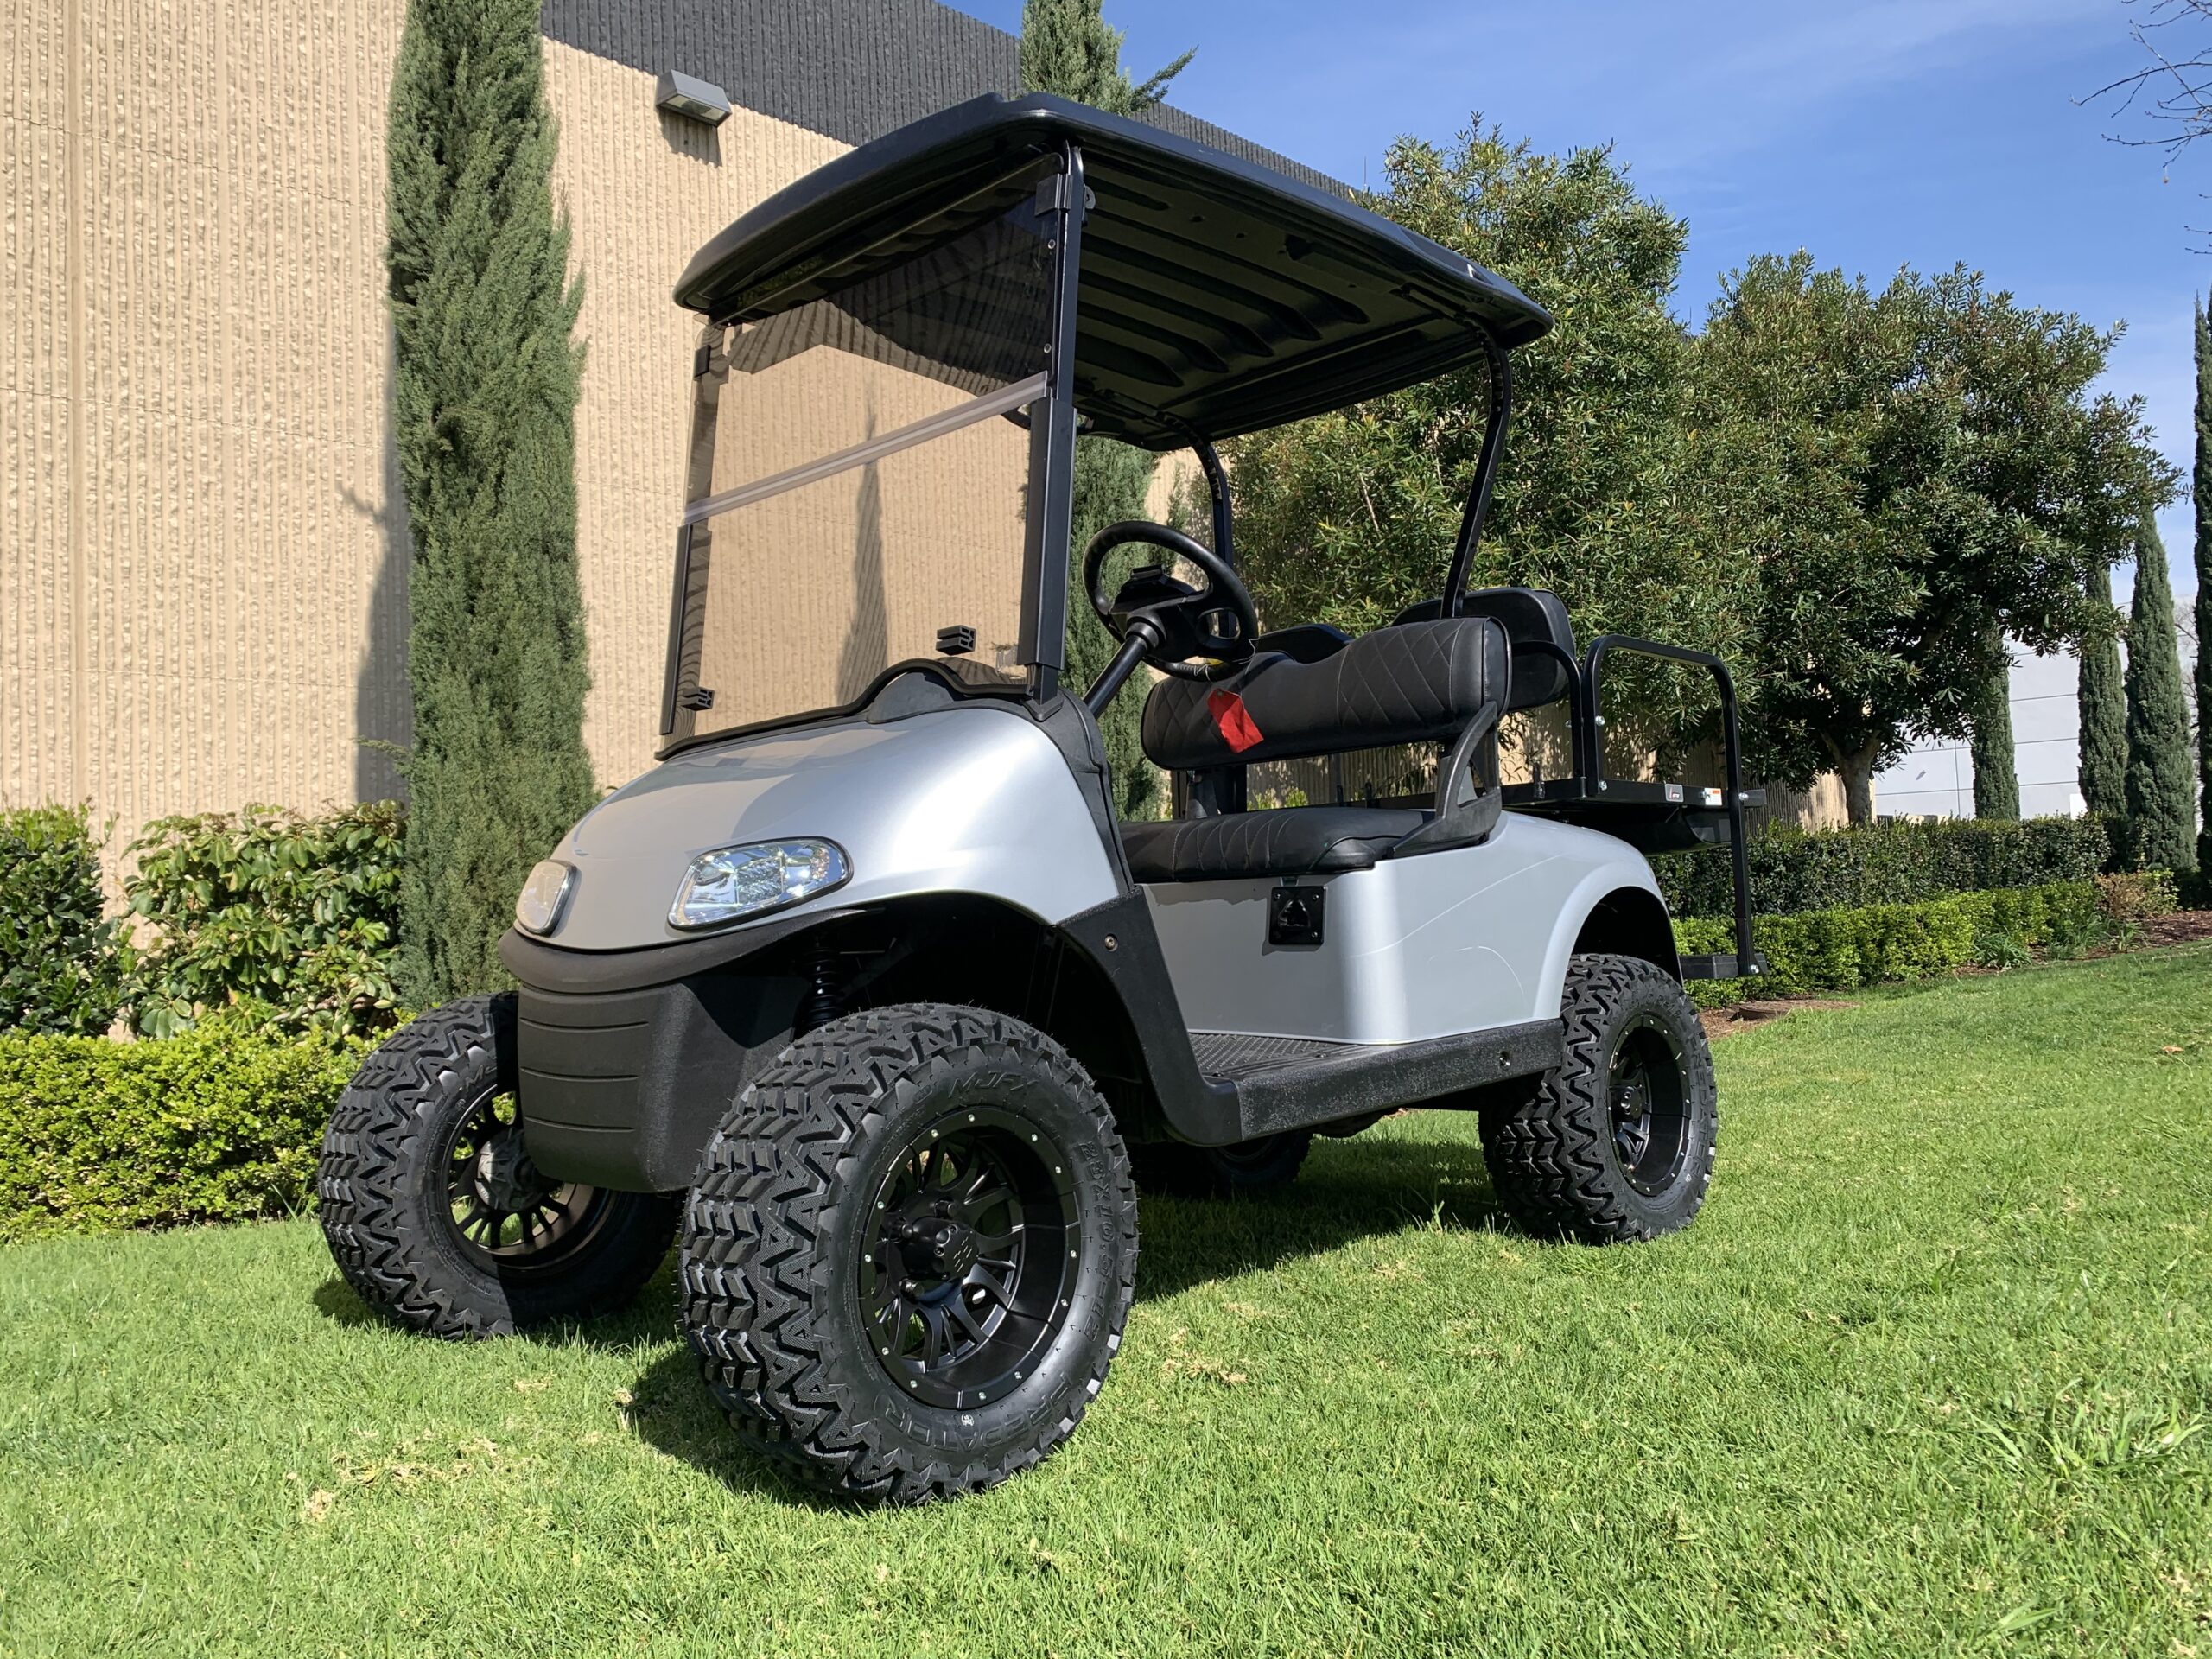 EZGO ELECTRIC RXV LIFTED 4 PASS GOLF CART – SILVER, #B31